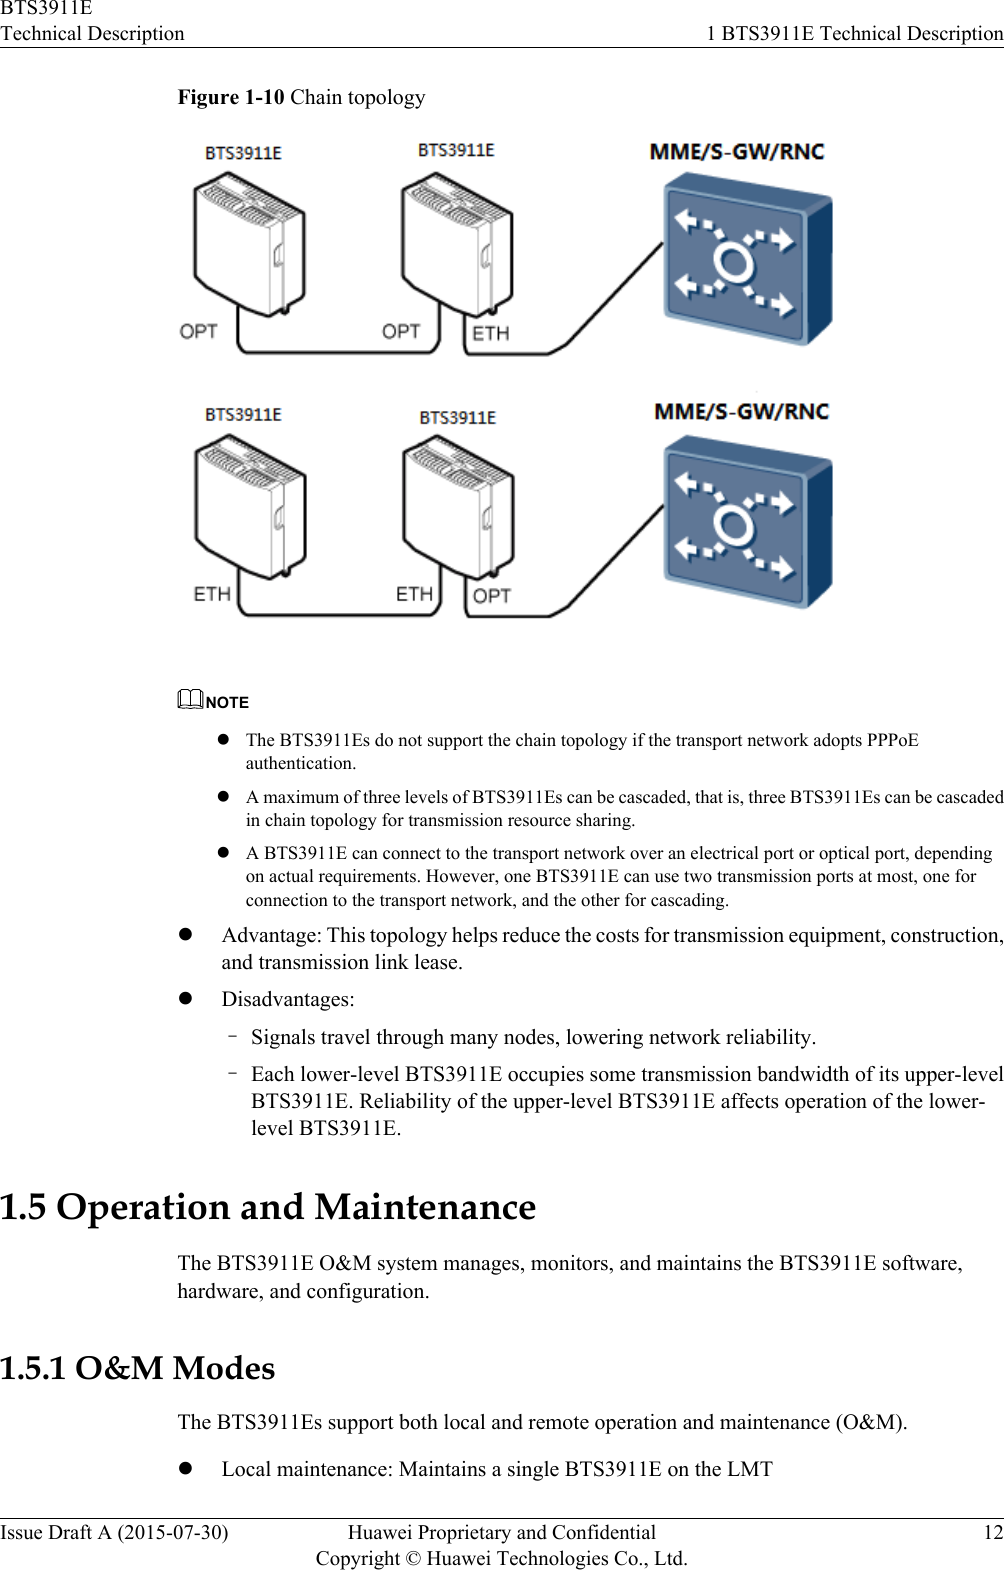 Figure 1-10 Chain topologyNOTElThe BTS3911Es do not support the chain topology if the transport network adopts PPPoEauthentication.lA maximum of three levels of BTS3911Es can be cascaded, that is, three BTS3911Es can be cascadedin chain topology for transmission resource sharing.lA BTS3911E can connect to the transport network over an electrical port or optical port, dependingon actual requirements. However, one BTS3911E can use two transmission ports at most, one forconnection to the transport network, and the other for cascading.lAdvantage: This topology helps reduce the costs for transmission equipment, construction,and transmission link lease.lDisadvantages:–Signals travel through many nodes, lowering network reliability.–Each lower-level BTS3911E occupies some transmission bandwidth of its upper-levelBTS3911E. Reliability of the upper-level BTS3911E affects operation of the lower-level BTS3911E.1.5 Operation and MaintenanceThe BTS3911E O&amp;M system manages, monitors, and maintains the BTS3911E software,hardware, and configuration.1.5.1 O&amp;M ModesThe BTS3911Es support both local and remote operation and maintenance (O&amp;M).lLocal maintenance: Maintains a single BTS3911E on the LMTBTS3911ETechnical Description 1 BTS3911E Technical DescriptionIssue Draft A (2015-07-30) Huawei Proprietary and ConfidentialCopyright © Huawei Technologies Co., Ltd.12